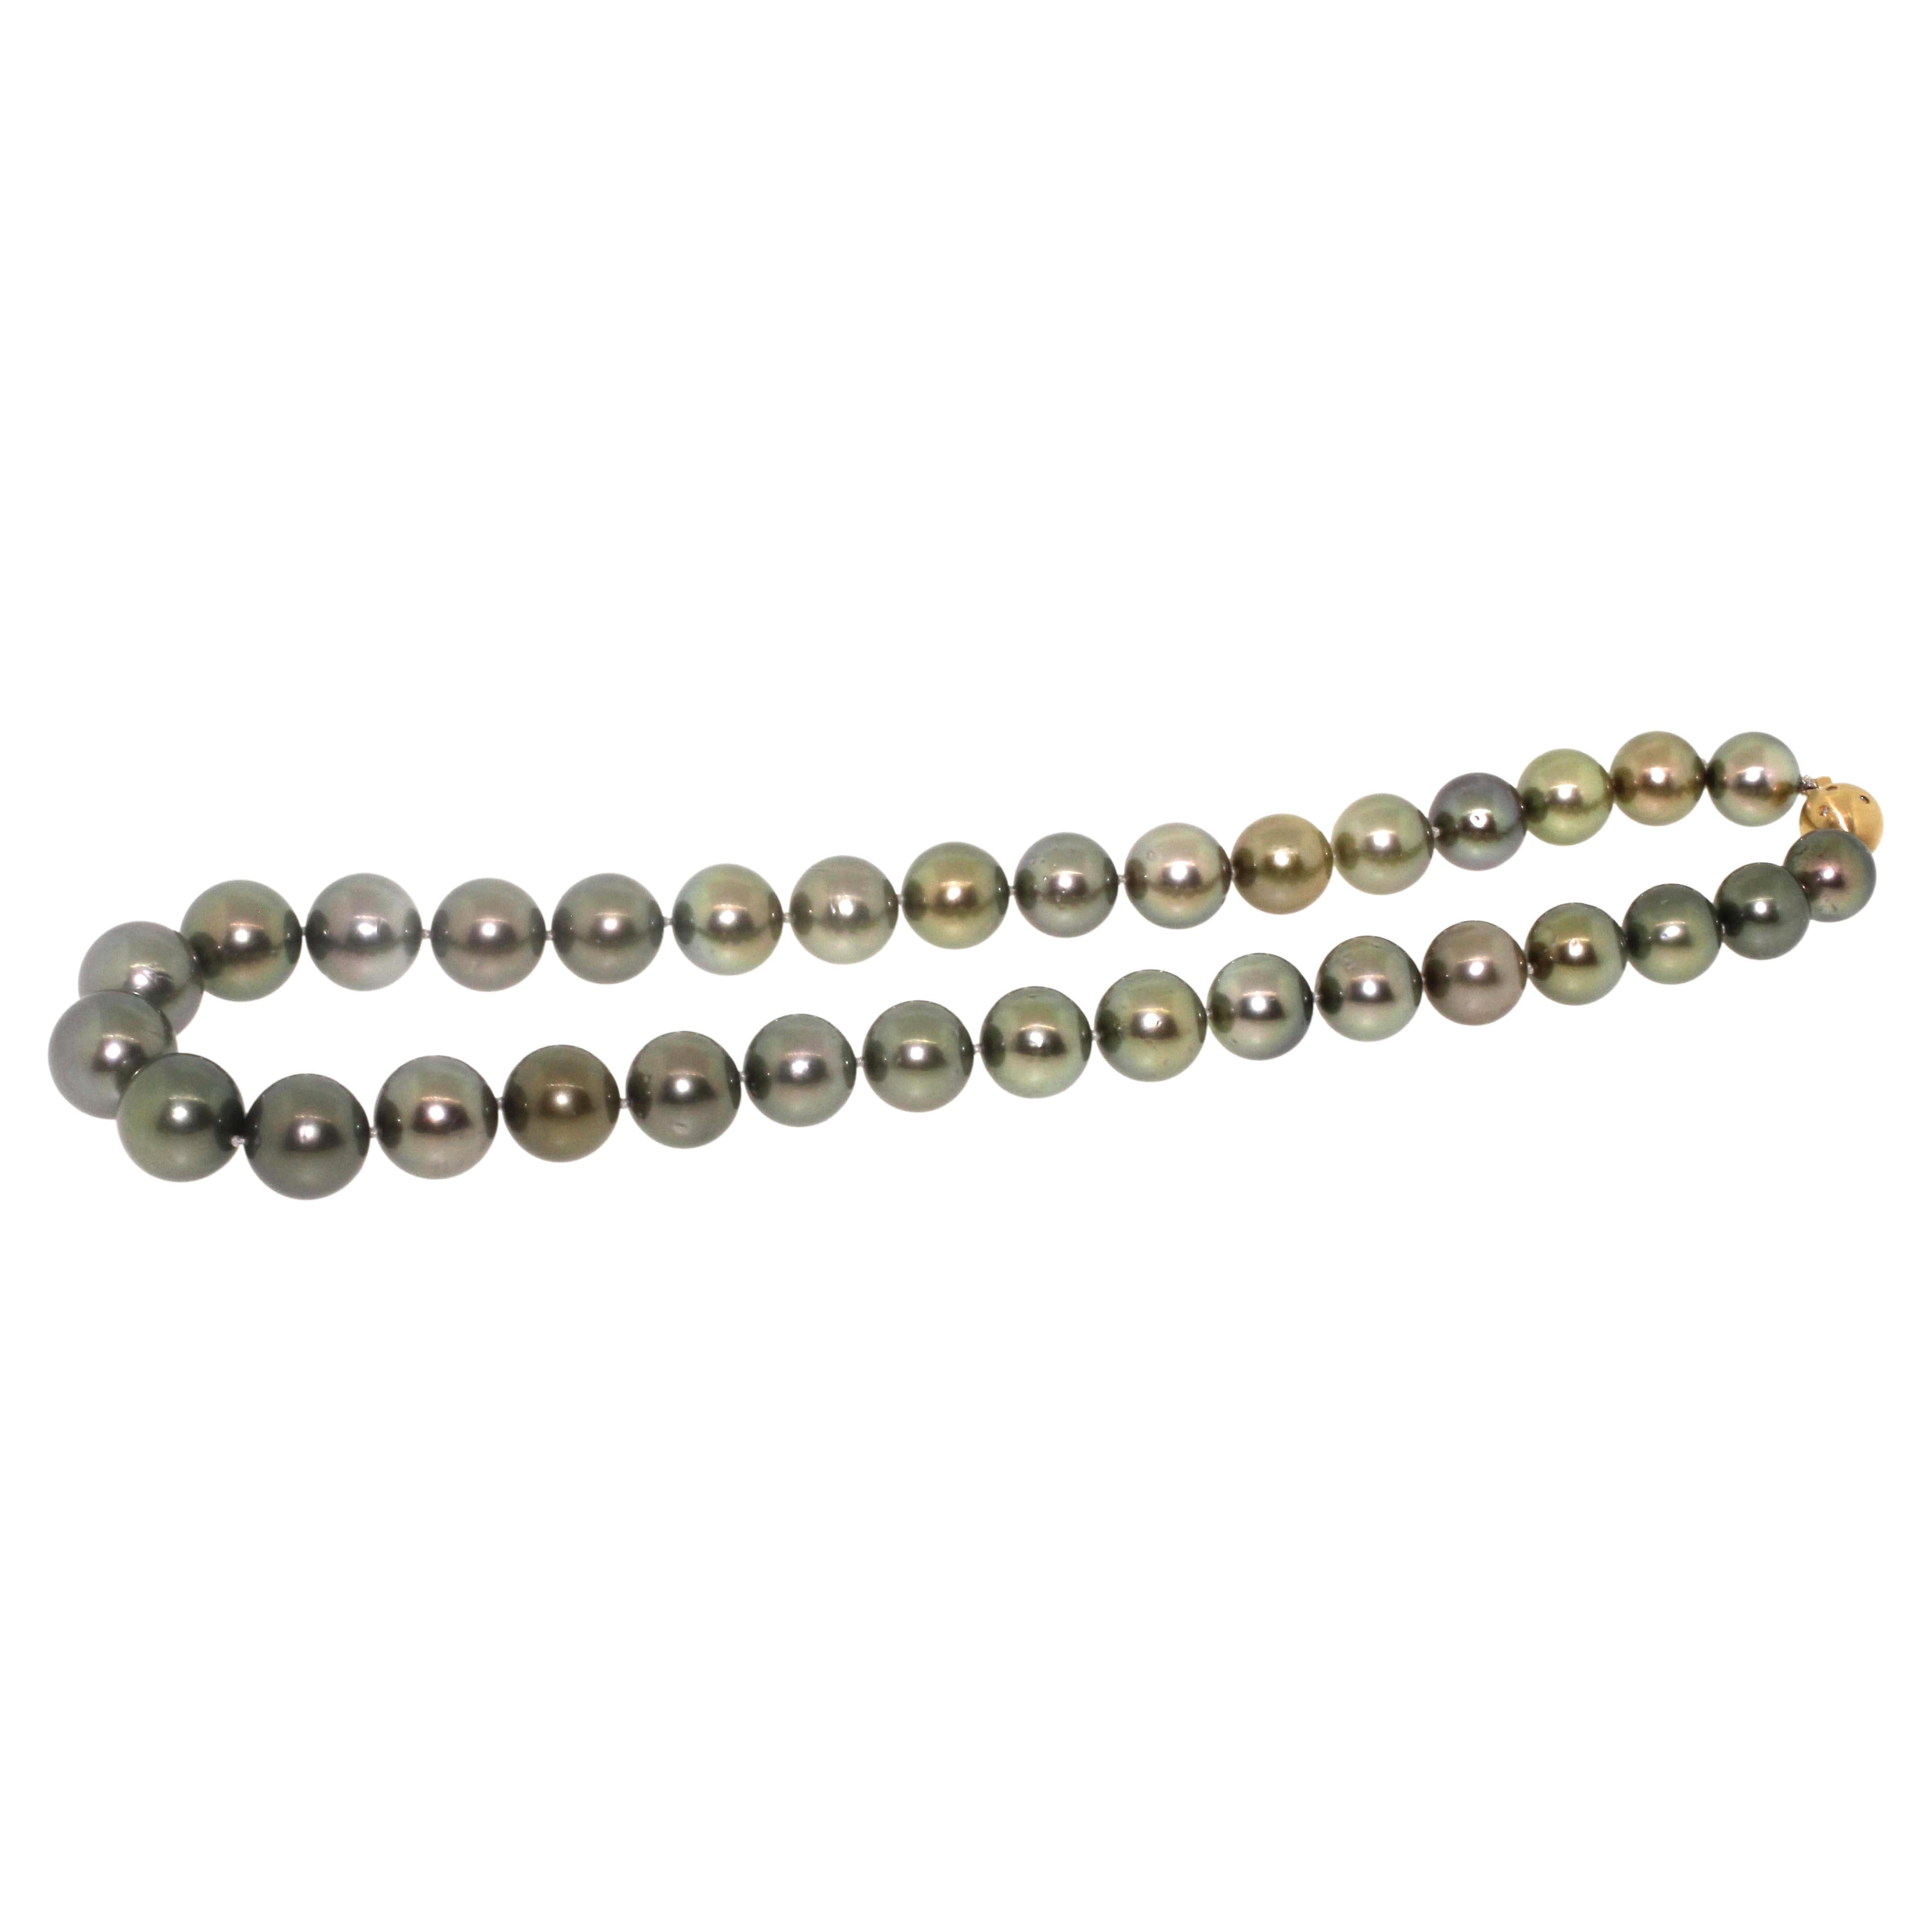 Hakimoto By Jewel Of Ocean Tahitian South Sea Pearl Necklace
33 High Luster with Green Tone 11x13.7mm Tahitian Pearls 
18K Yellow Gold with Diamonds Clasp
17.5